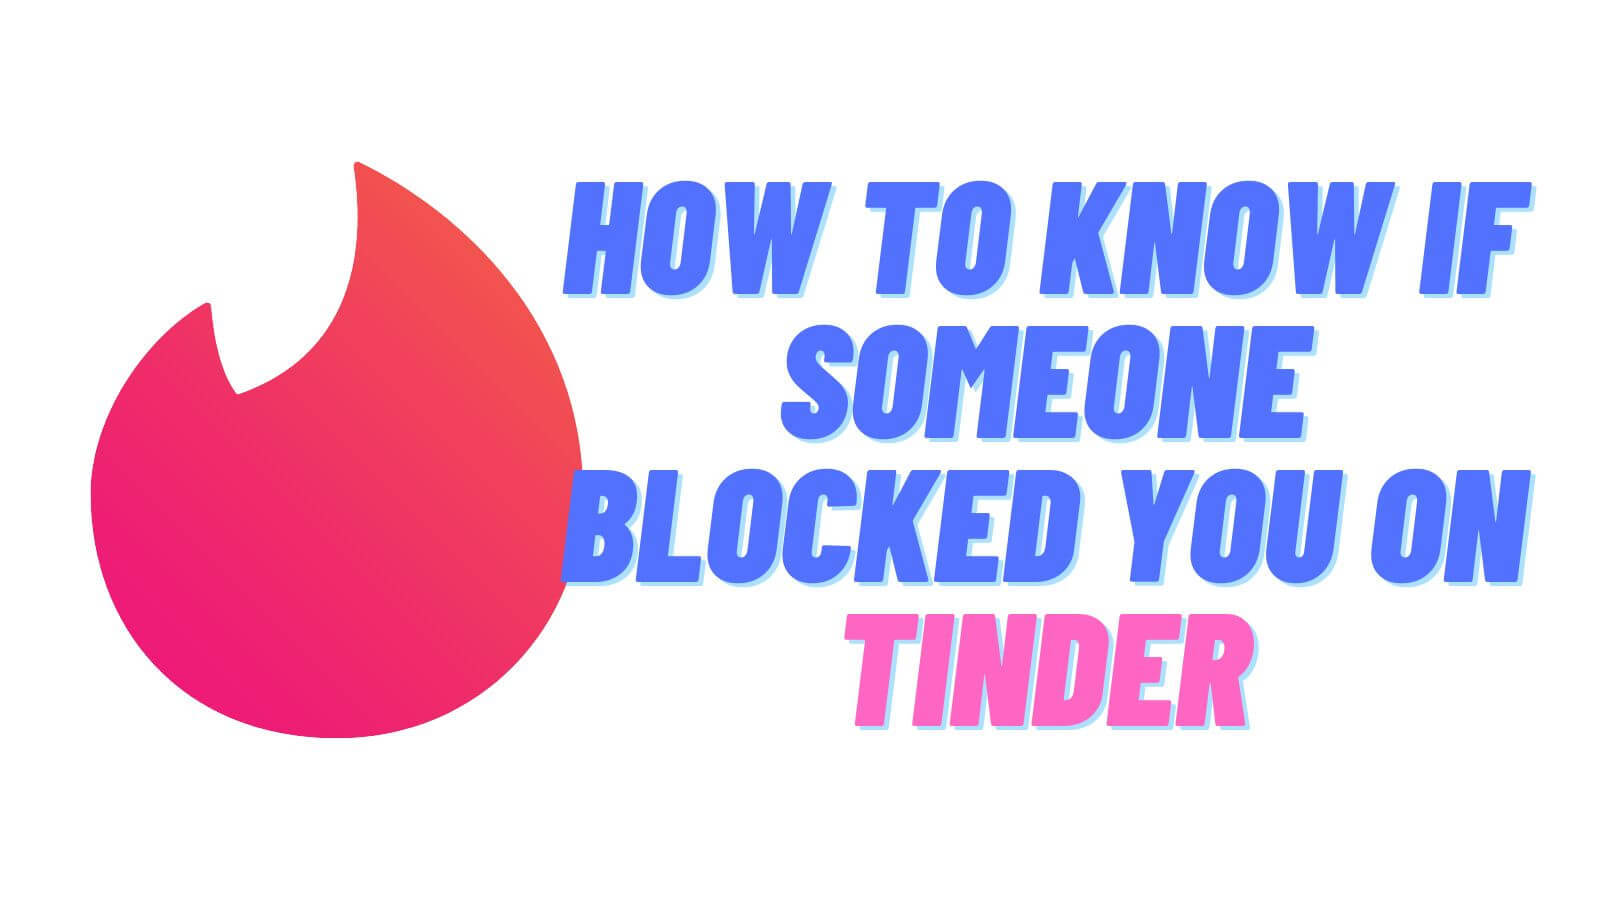 -How to Know if Someone Blocked You on Tinder